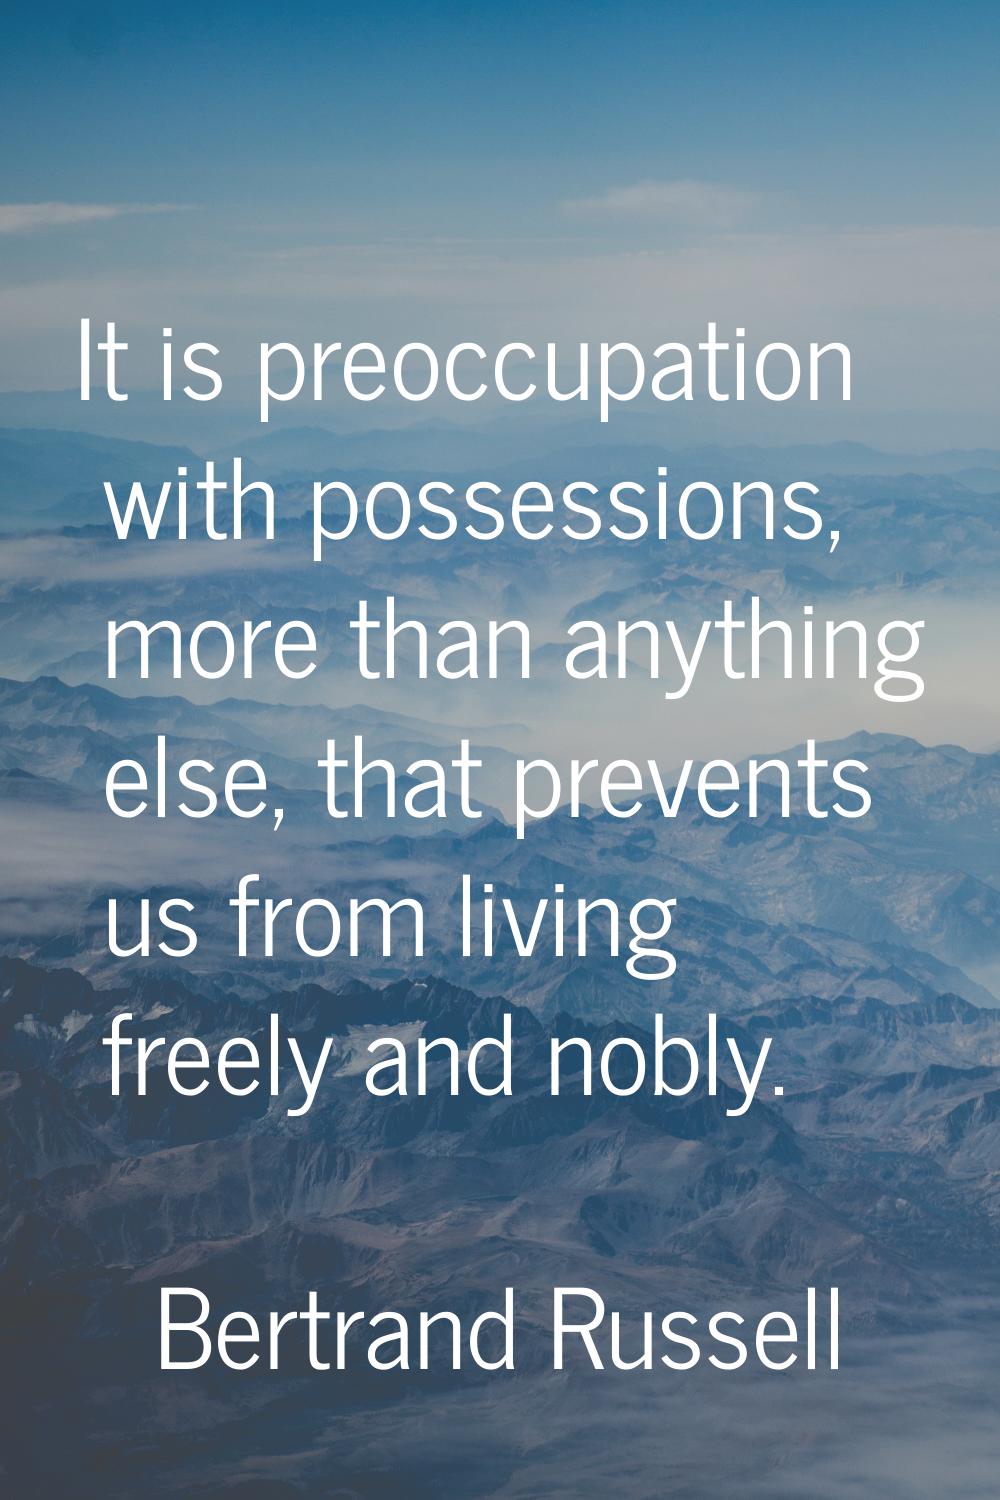 It is preoccupation with possessions, more than anything else, that prevents us from living freely 